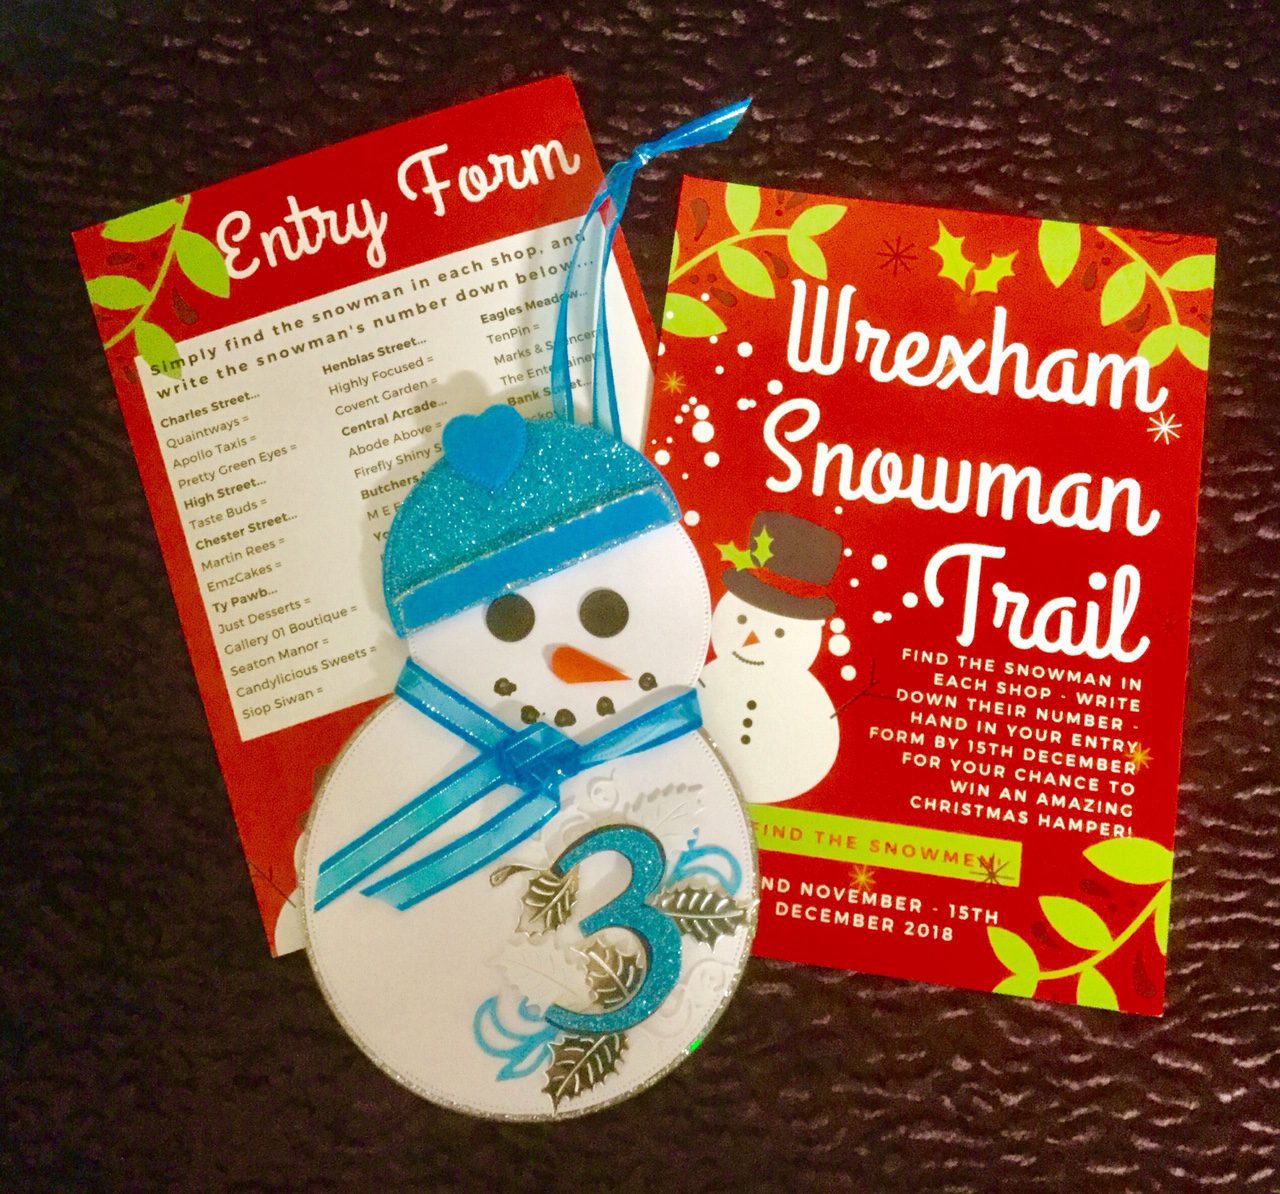 Have you hit the snowman trail yet?